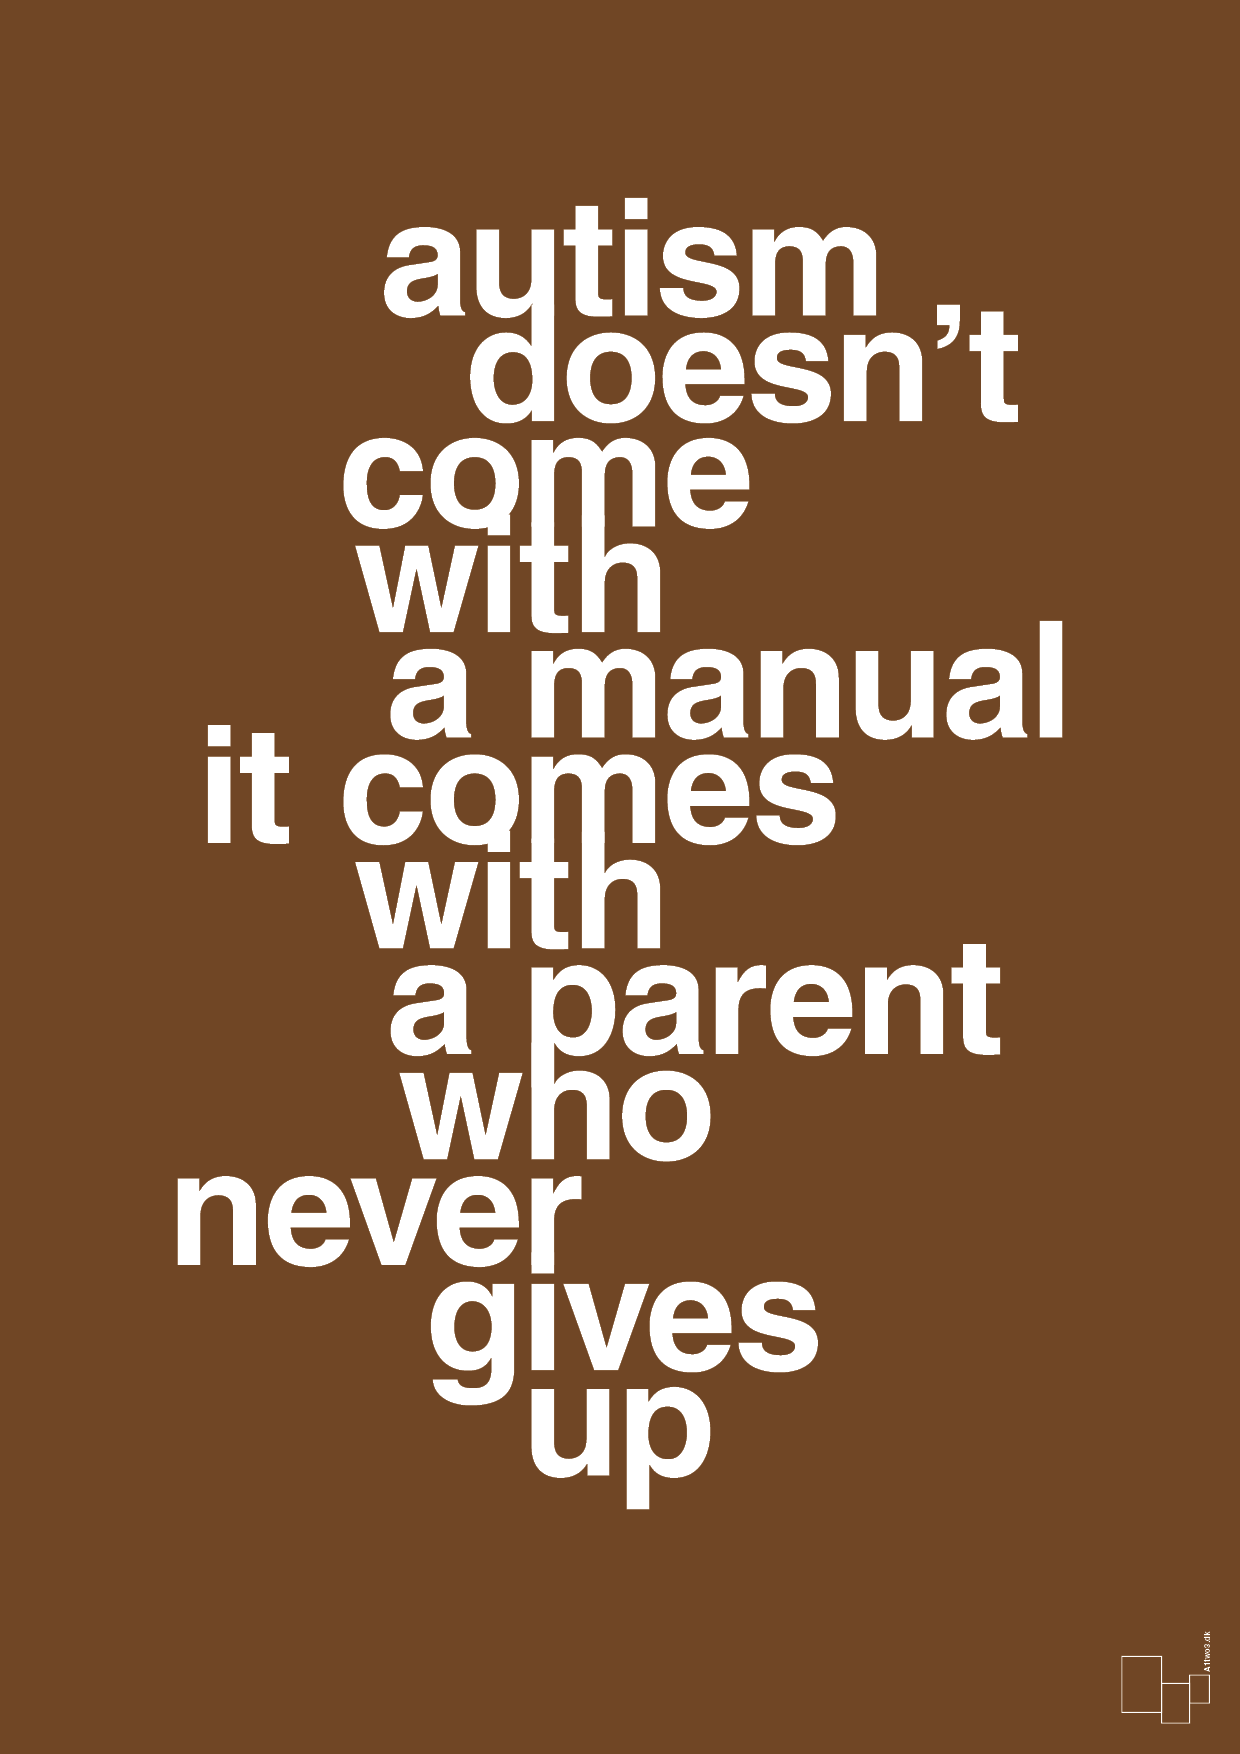 autism doesnt come with a manual it comes with a parent who never gives up - Plakat med Samfund i Dark Brown